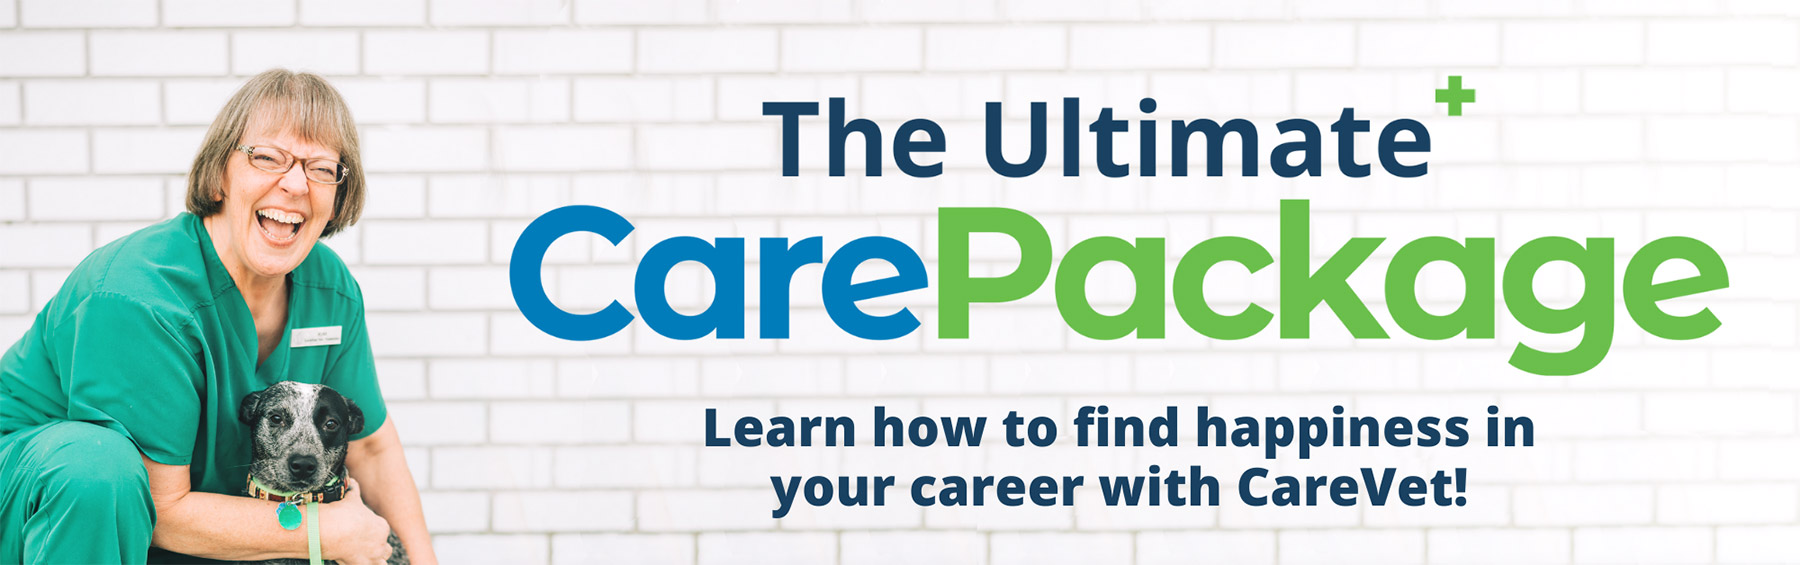 The Ultimate CarePackage. Learn how to find happiness in your career with CareVet!